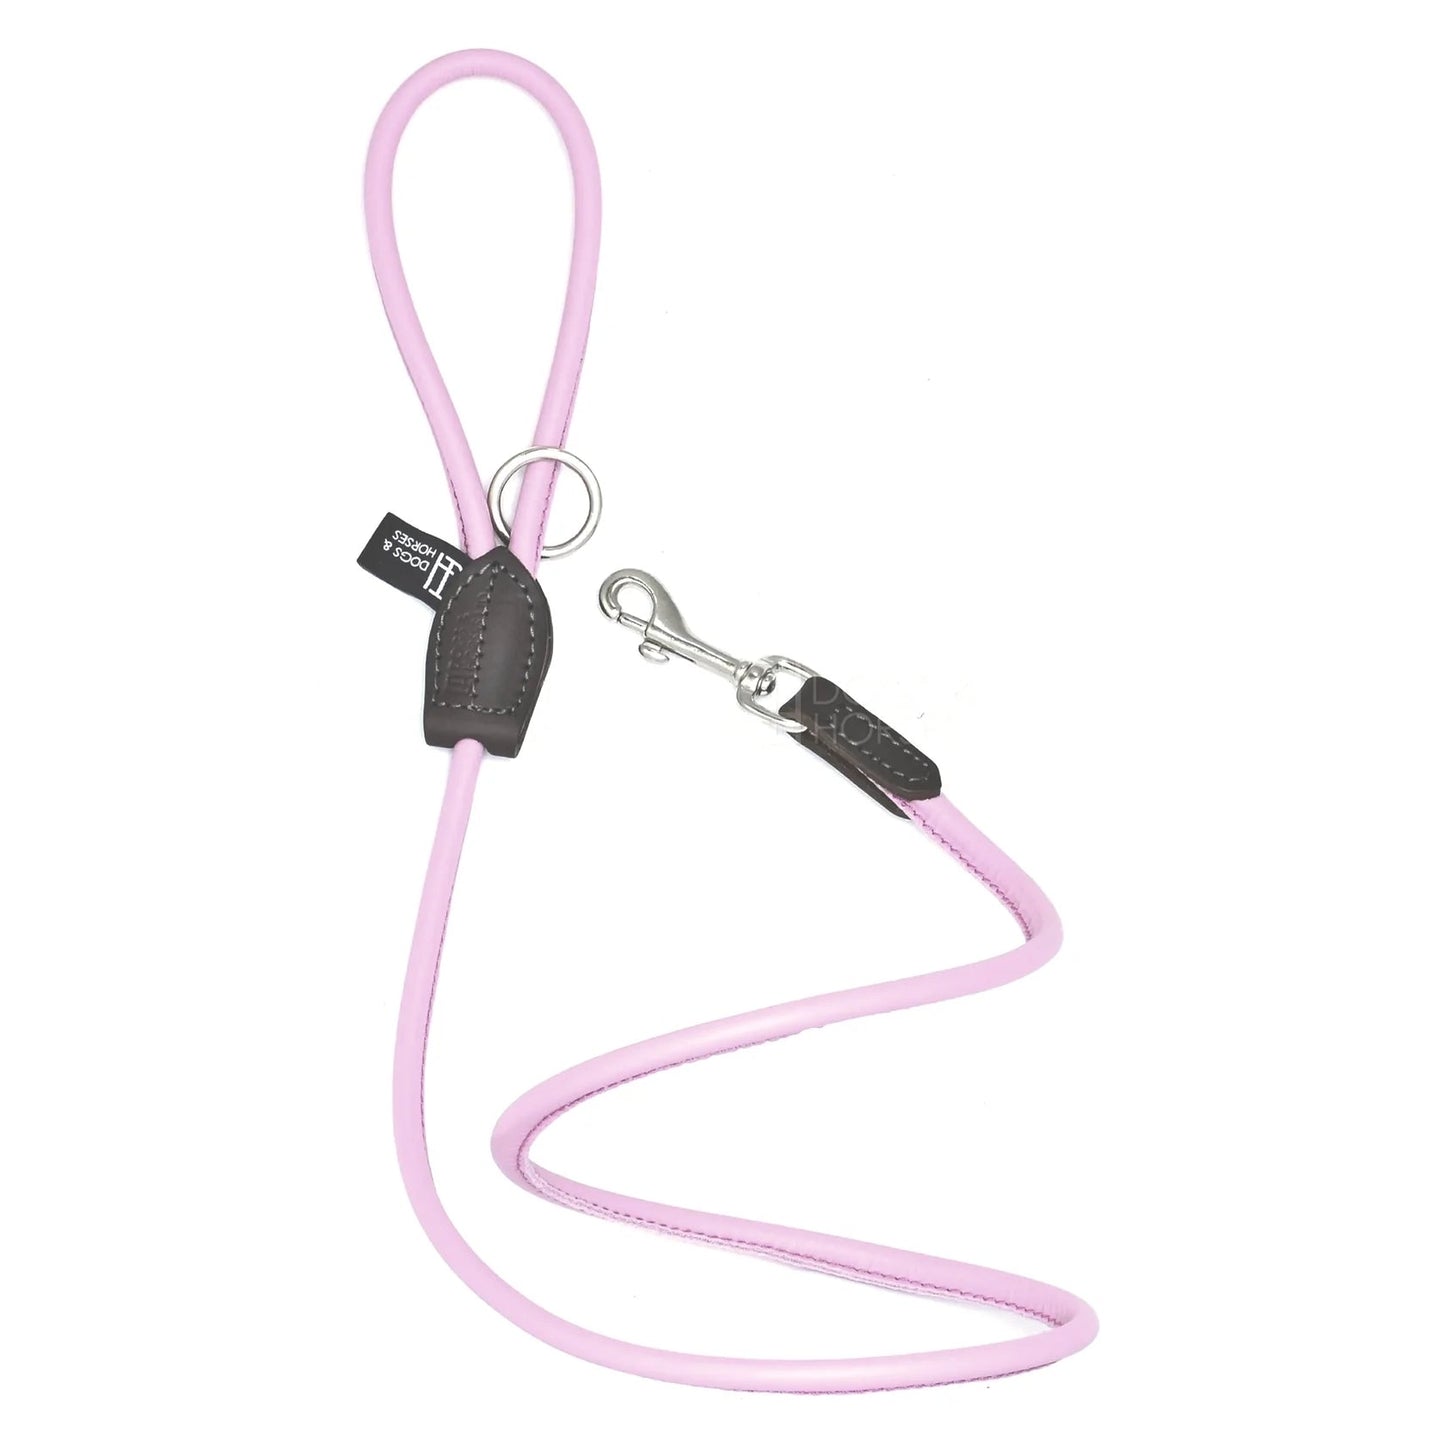 Dogs & Horses Rolled Soft Leather Dog Lead Pink